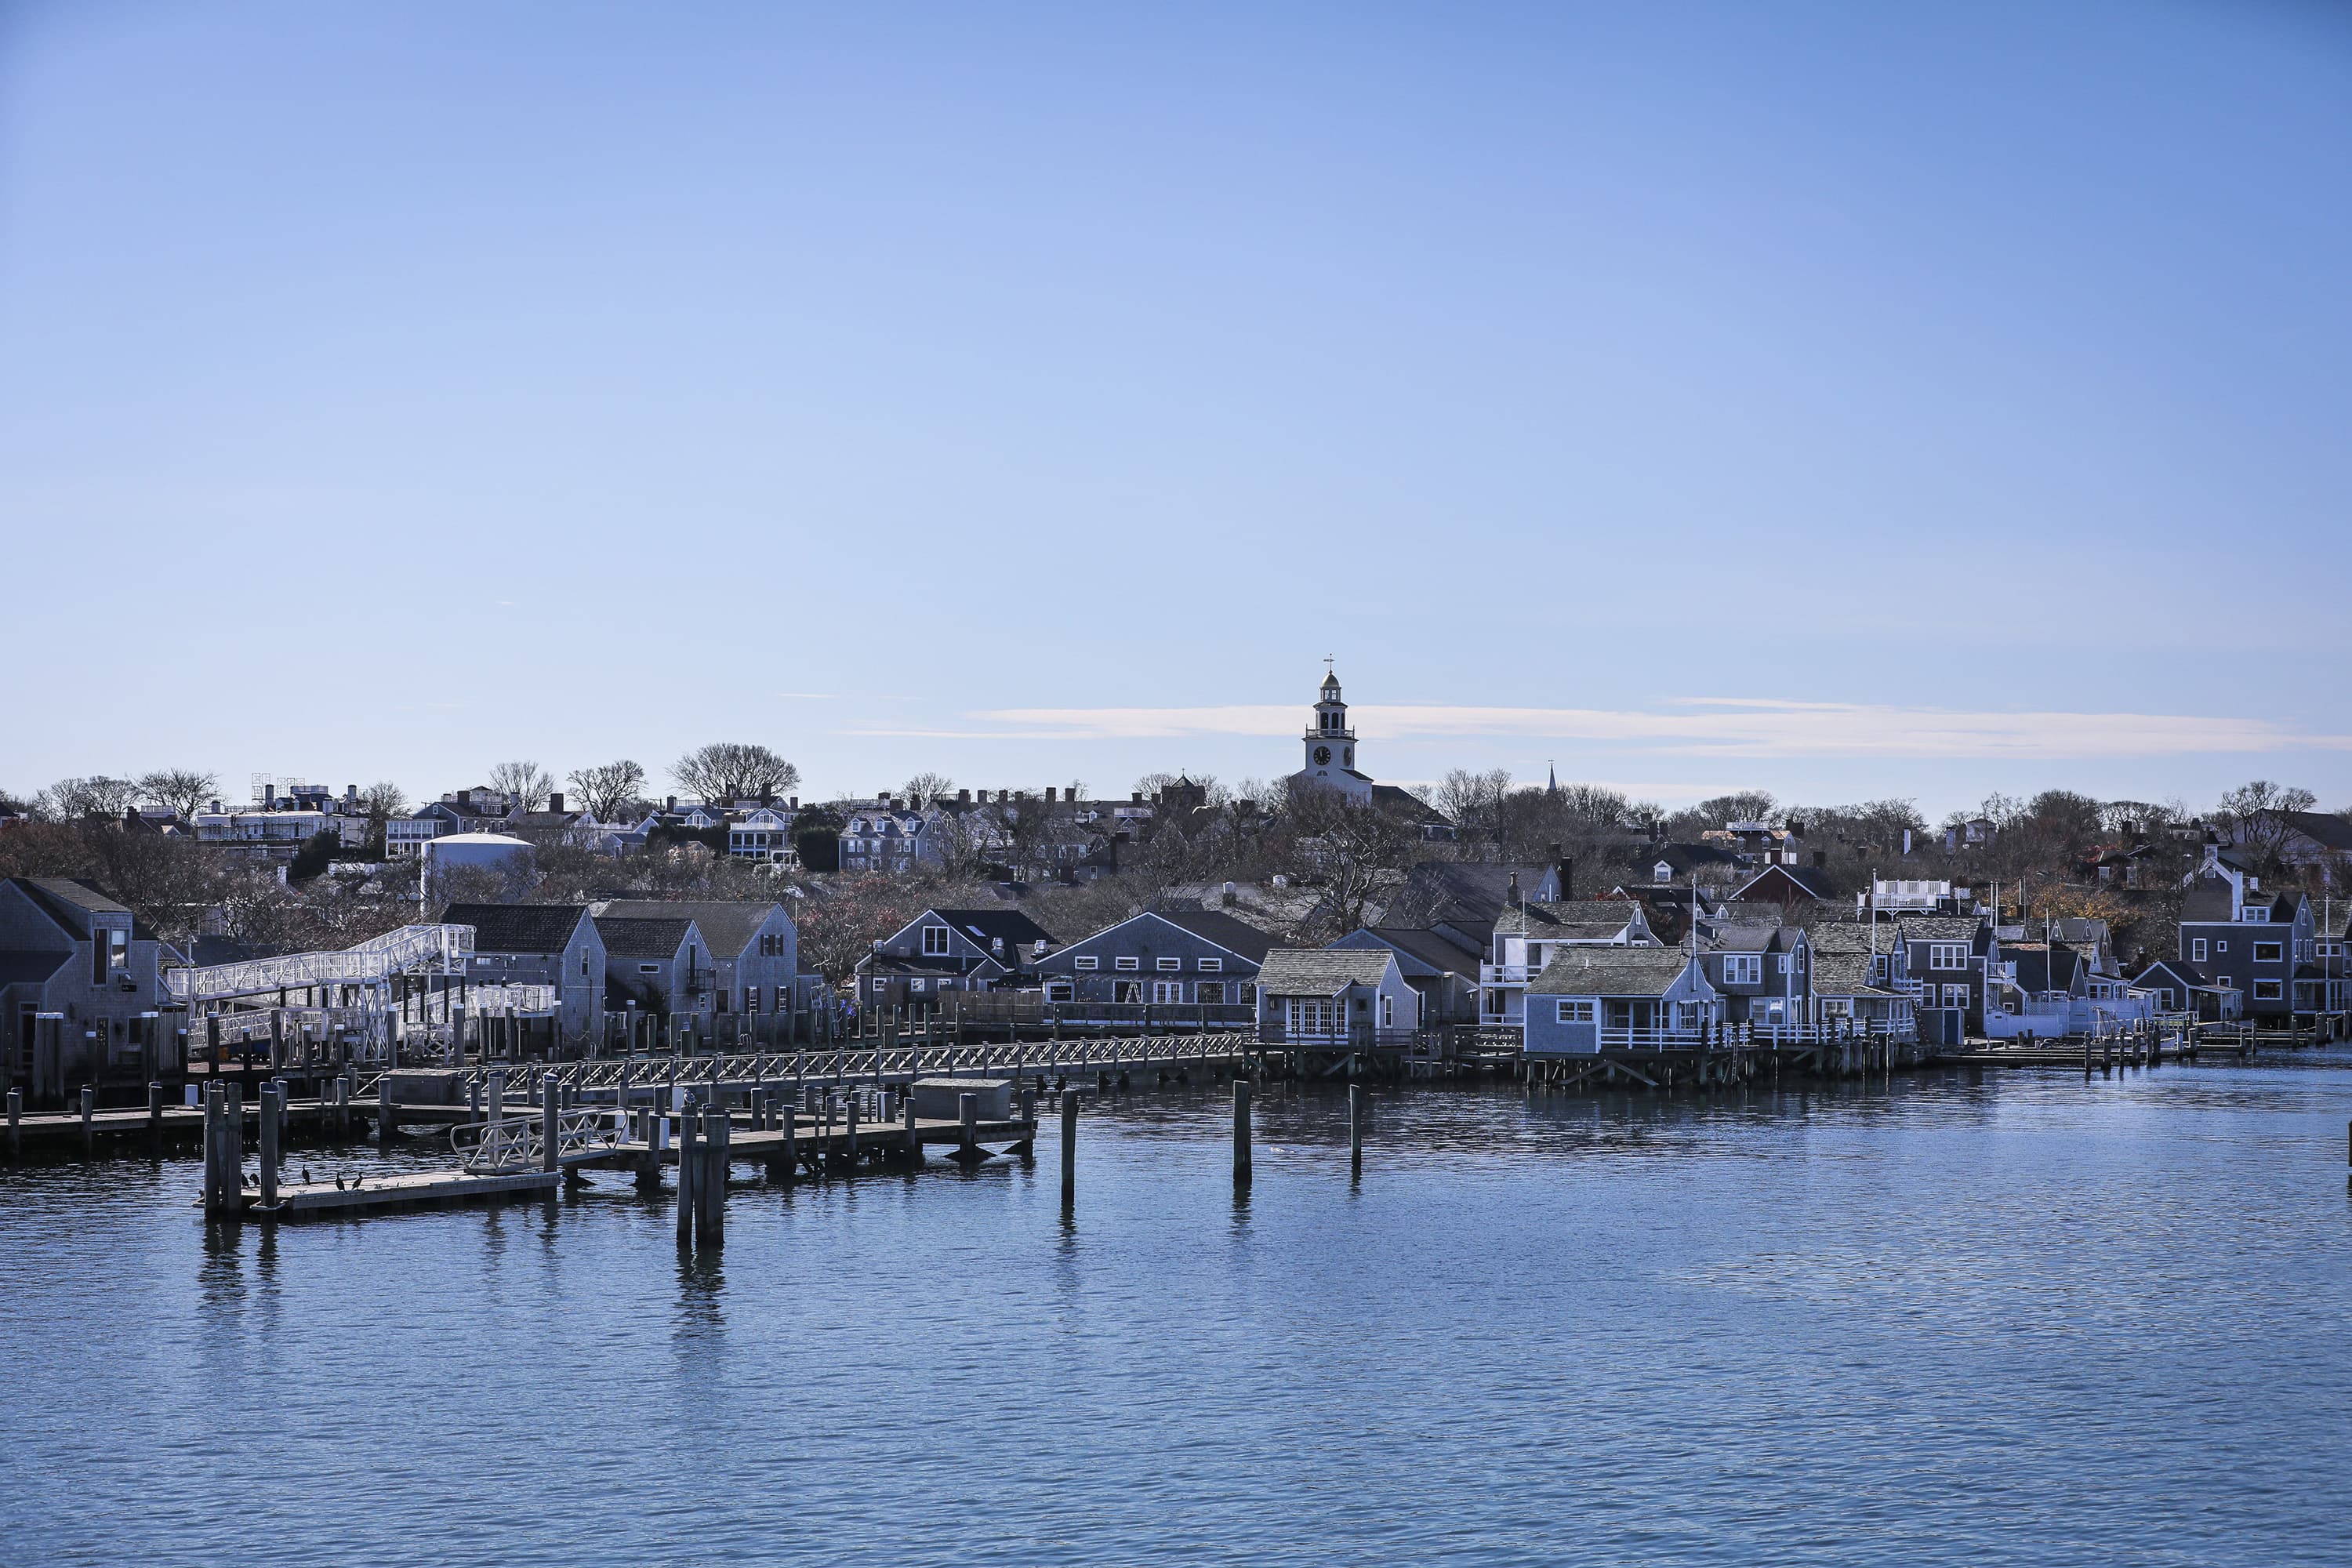 Nantucket is seen from the ferry. (Erin Clark/The Boston Globe via Getty Images)